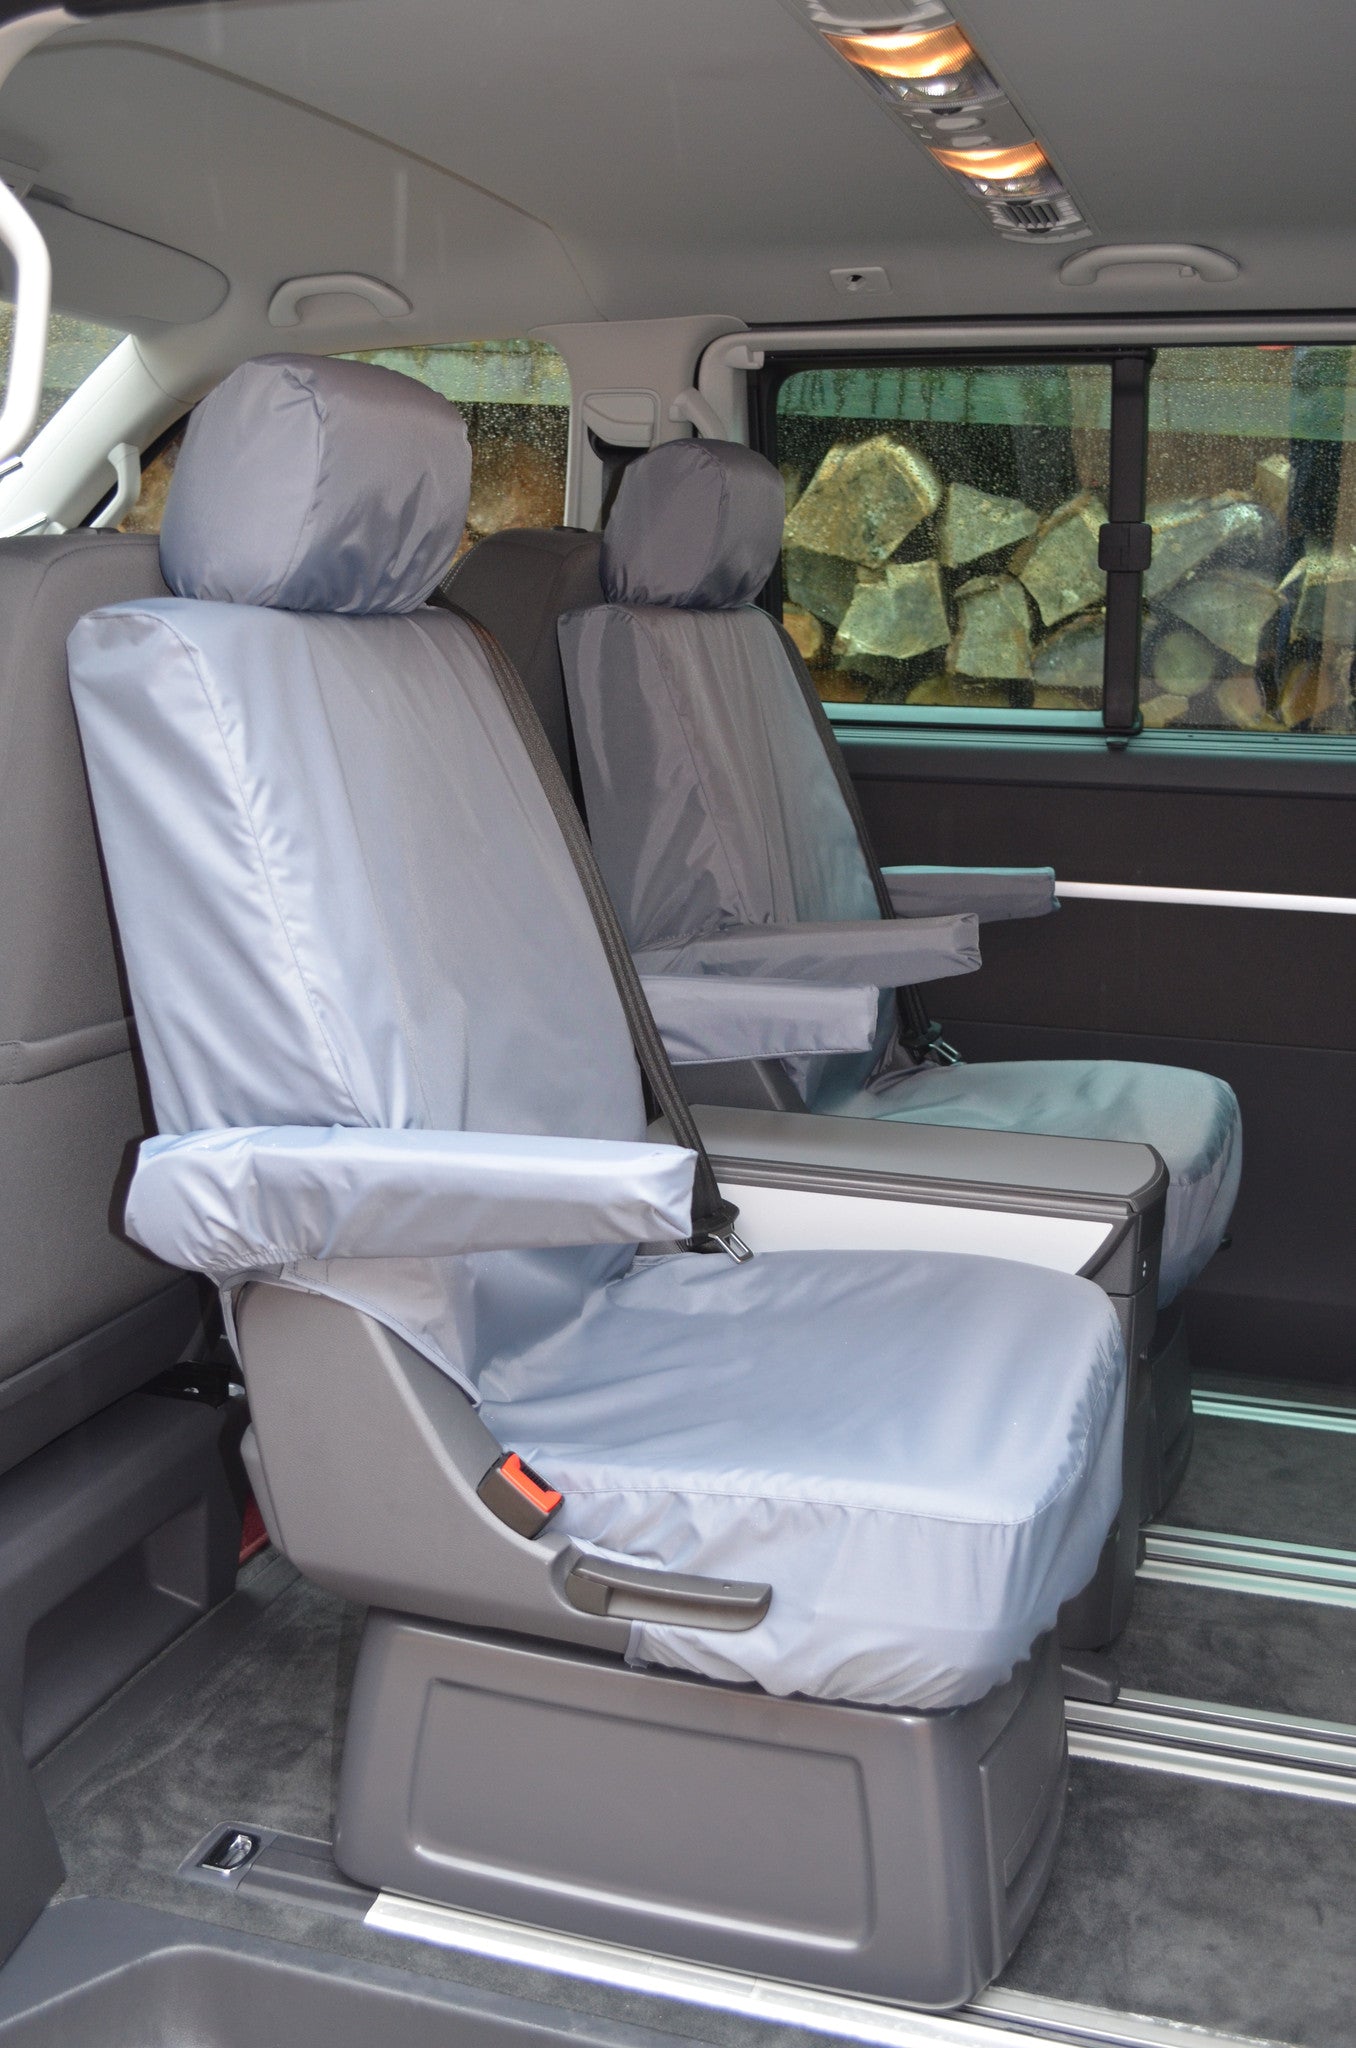 VW Volkswagen T5 Caravelle 2003 - 2015 Tailored Seat Covers Rear Pair of Singles / Grey Turtle Covers Ltd